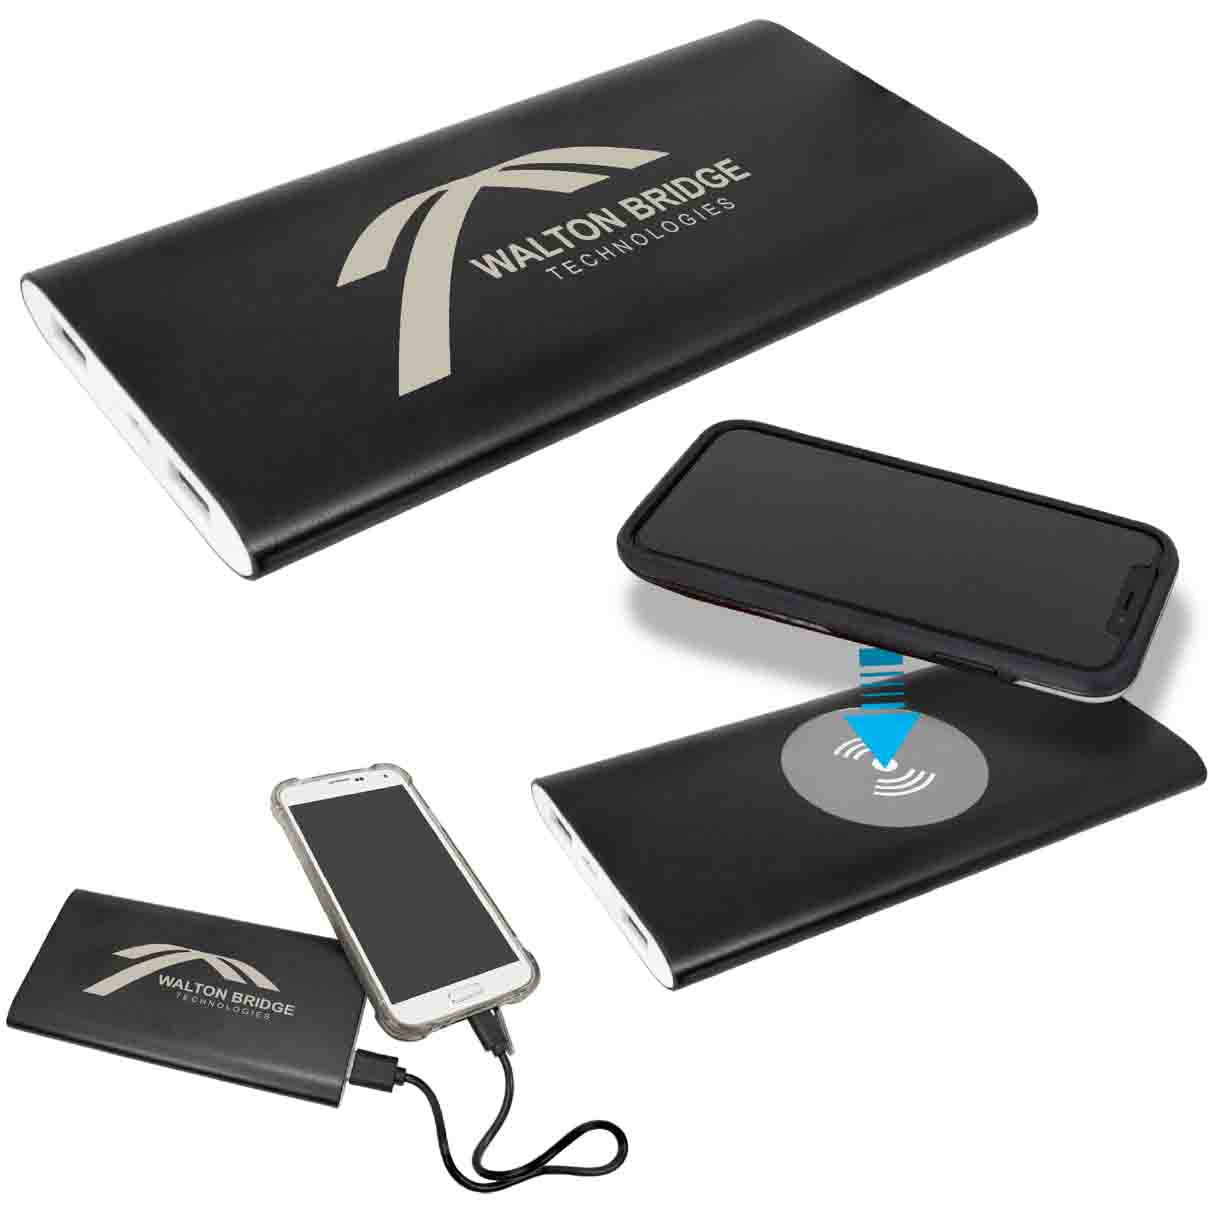 Customized Power Bank & Wireless Charger w/USB Power Cord